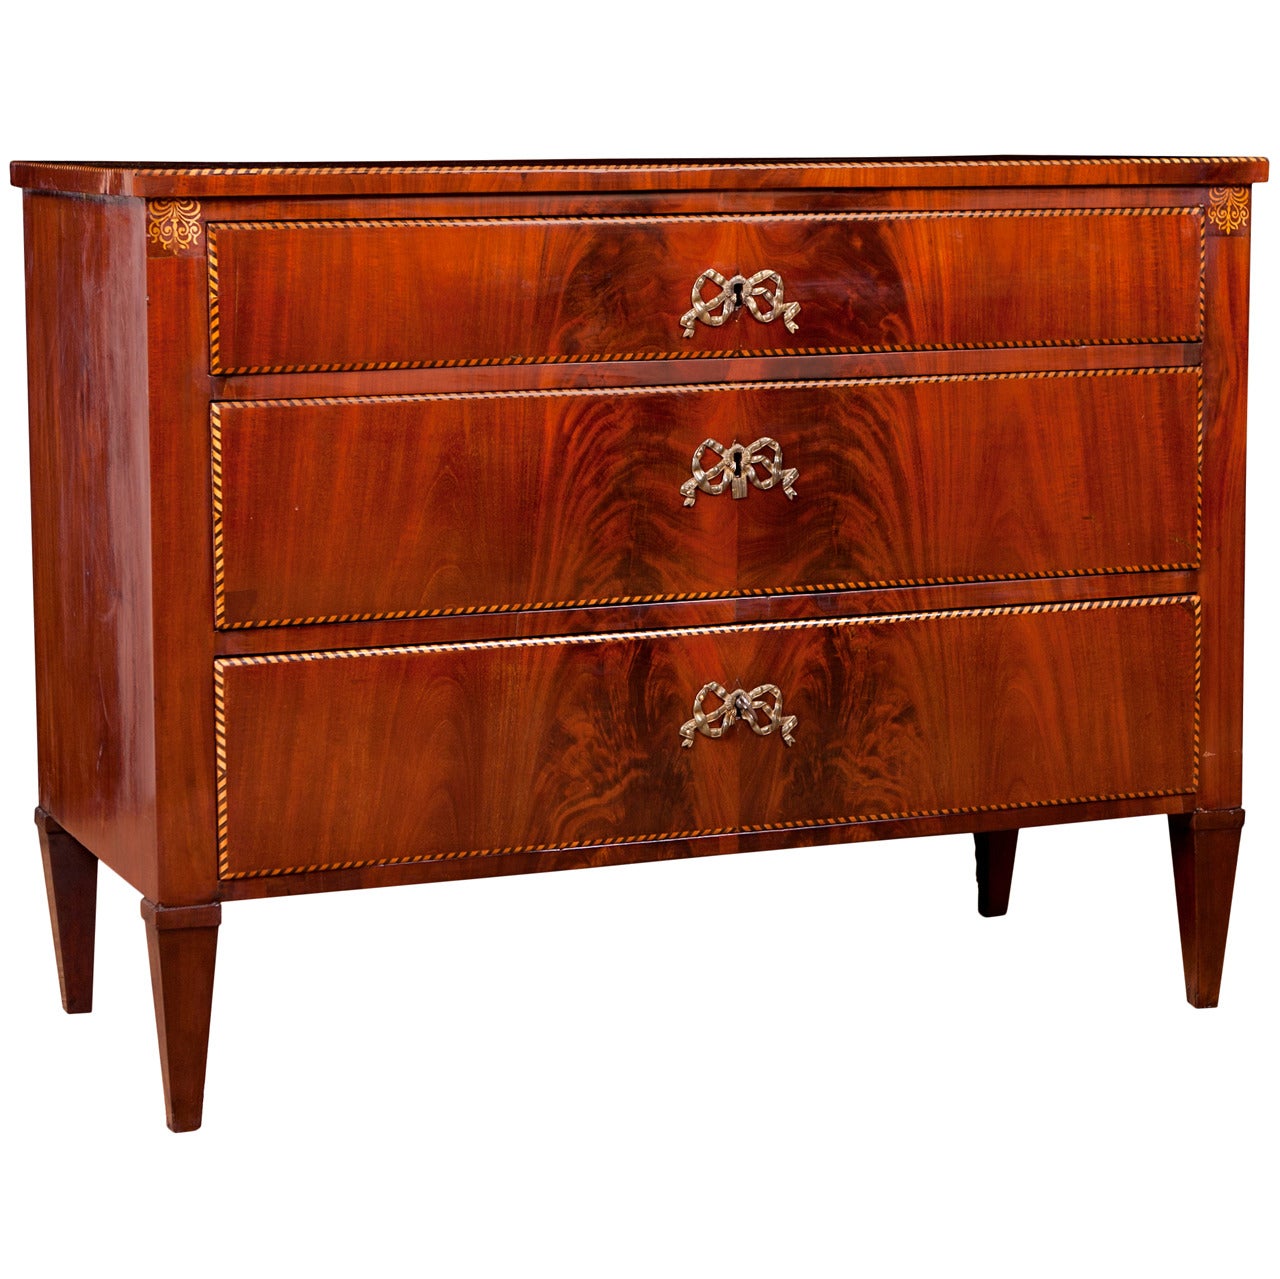 Empire Chest of Drawers in Mahogany with Satinwood Inlays, circa 1820